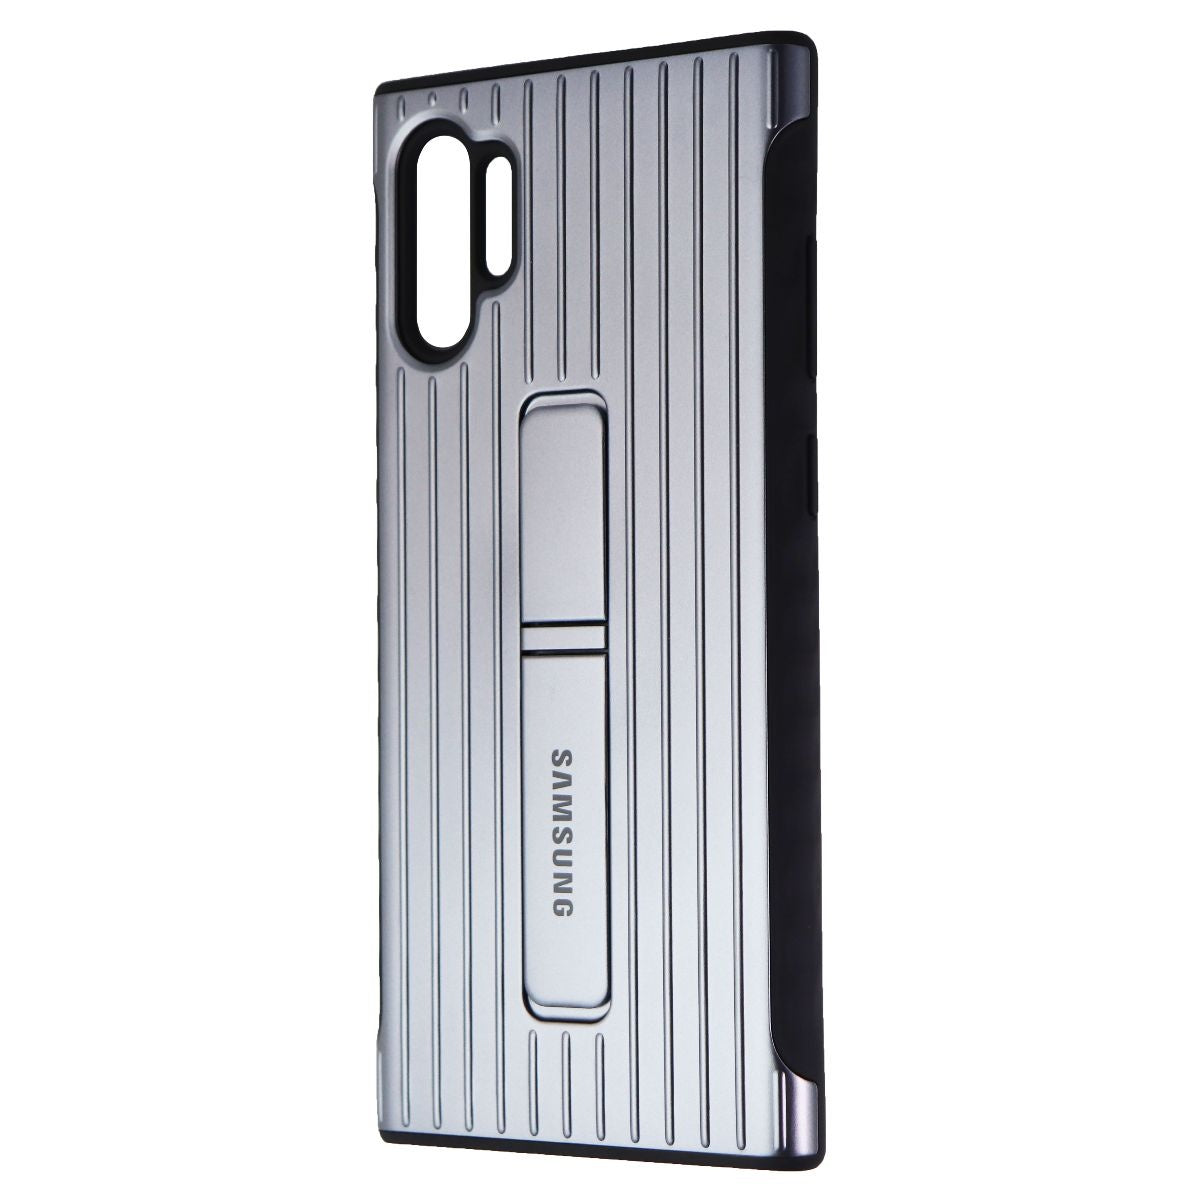 Samsung Rugged Protective Case for Galaxy Note10+ (Plus) - Silver Cell Phone - Cases, Covers & Skins Samsung Electronics    - Simple Cell Bulk Wholesale Pricing - USA Seller